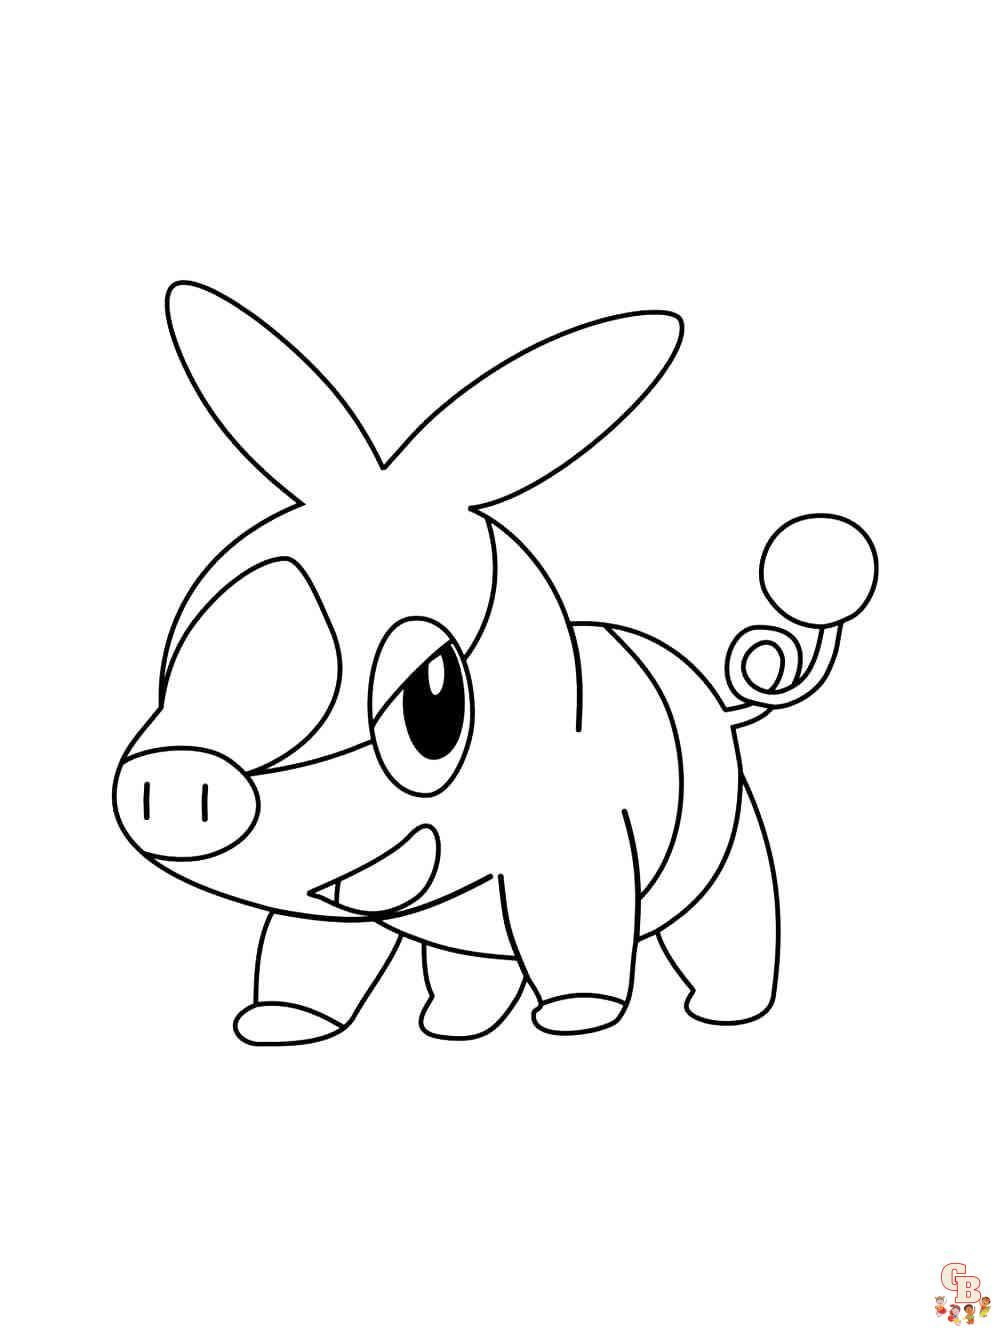 Pokemon Tepig coloring pages printable free